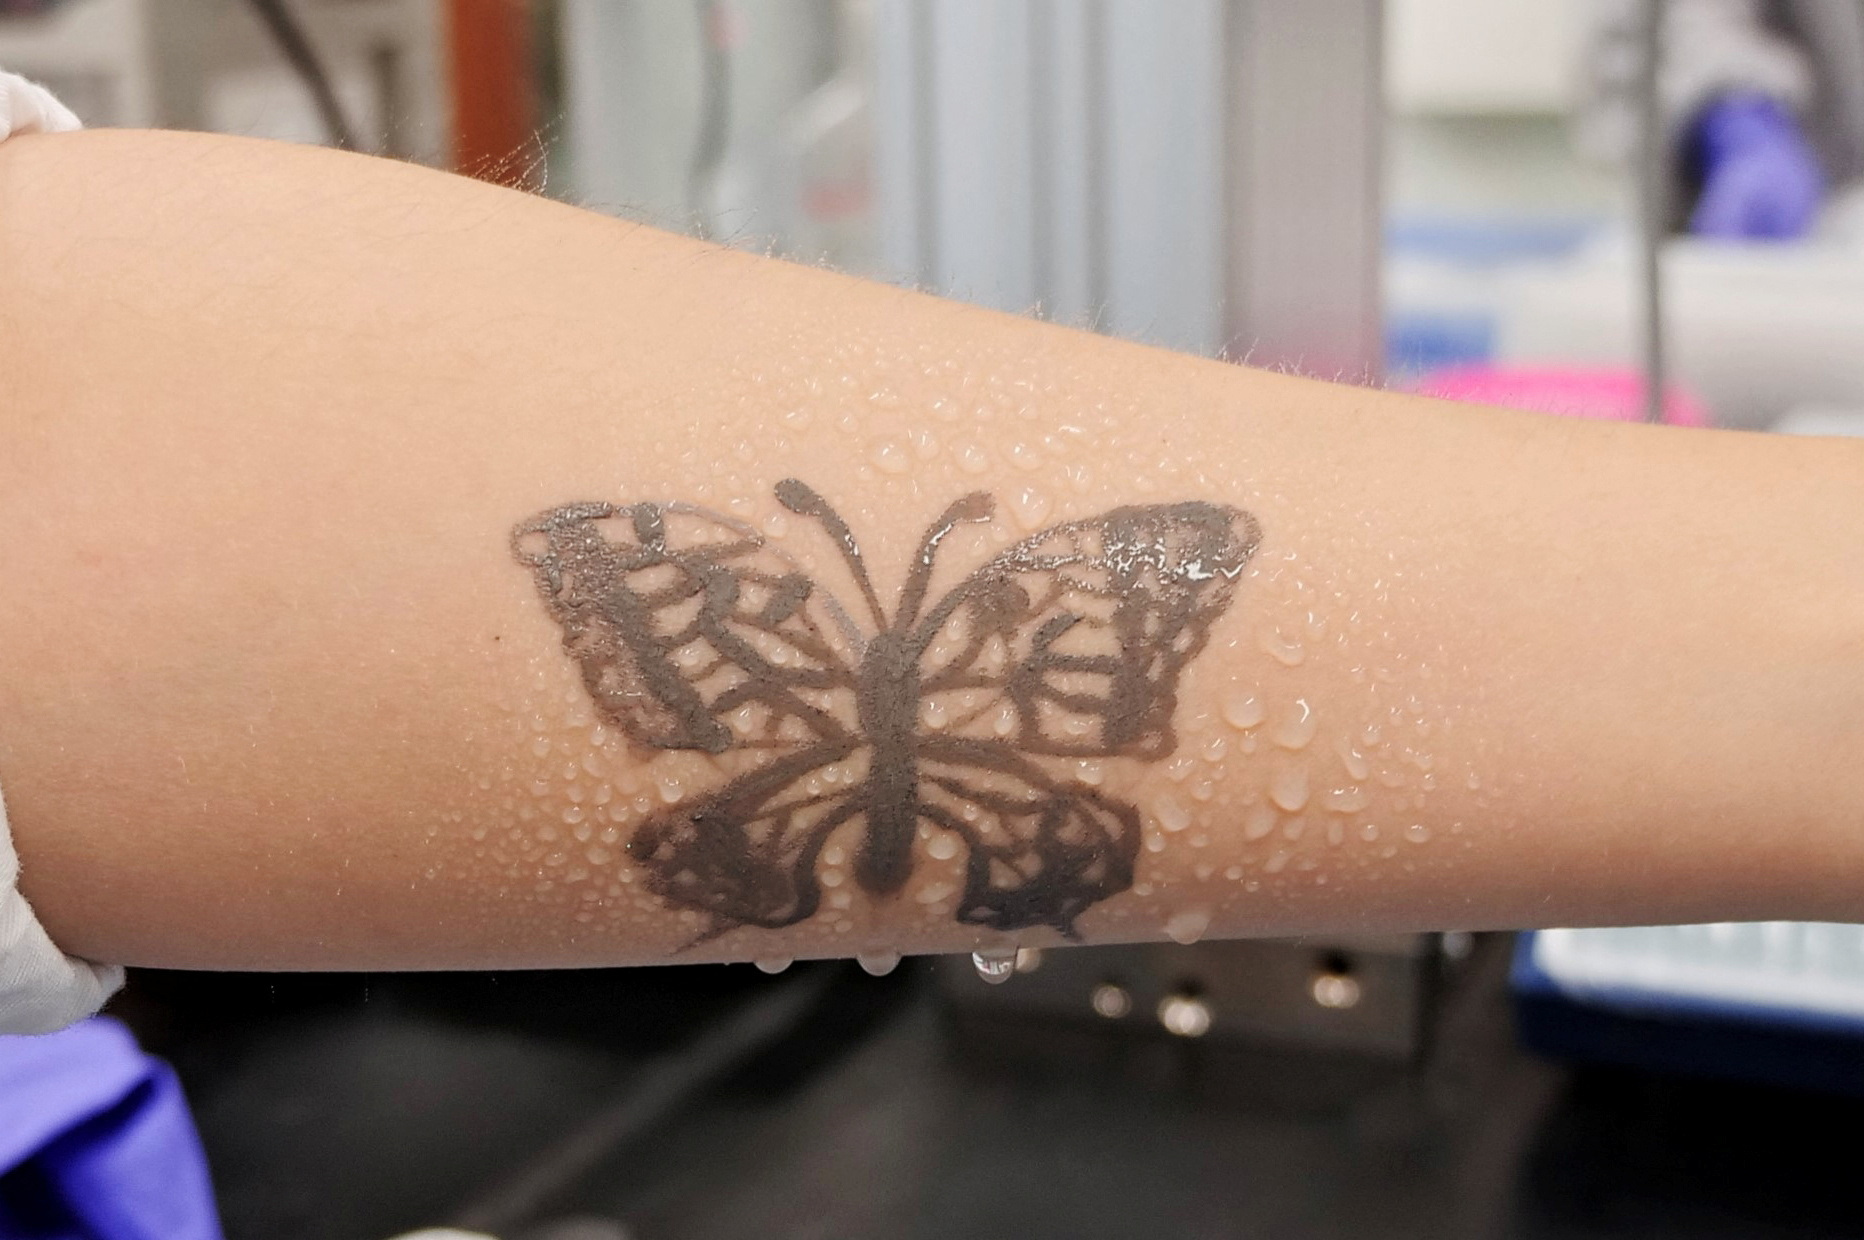 Water sprays on arm are seen with an electronic tattoo (e-tattoo) for the wettability test at the Korea Advanced Institute of Science and Technology (KAIST) in Daejeon